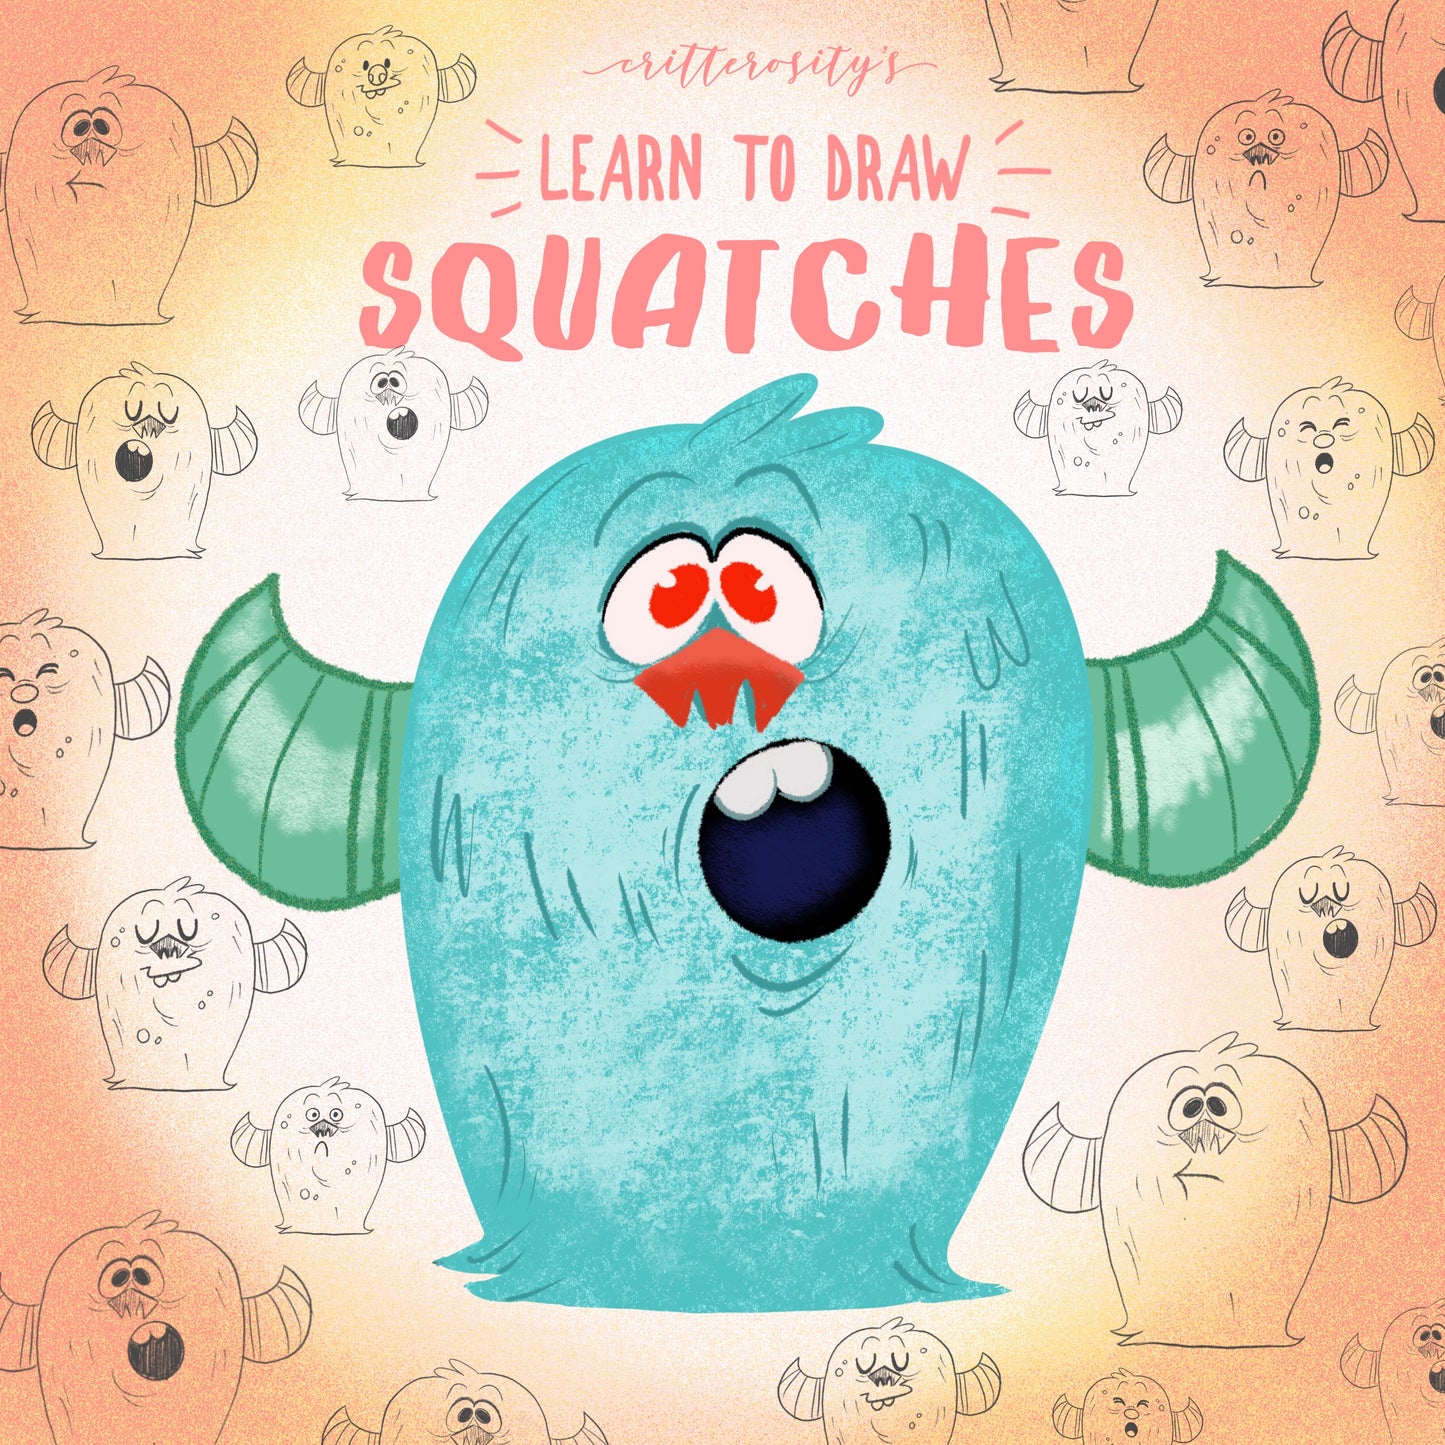 Critterosity’s “Learn to Draw Squatches” Book